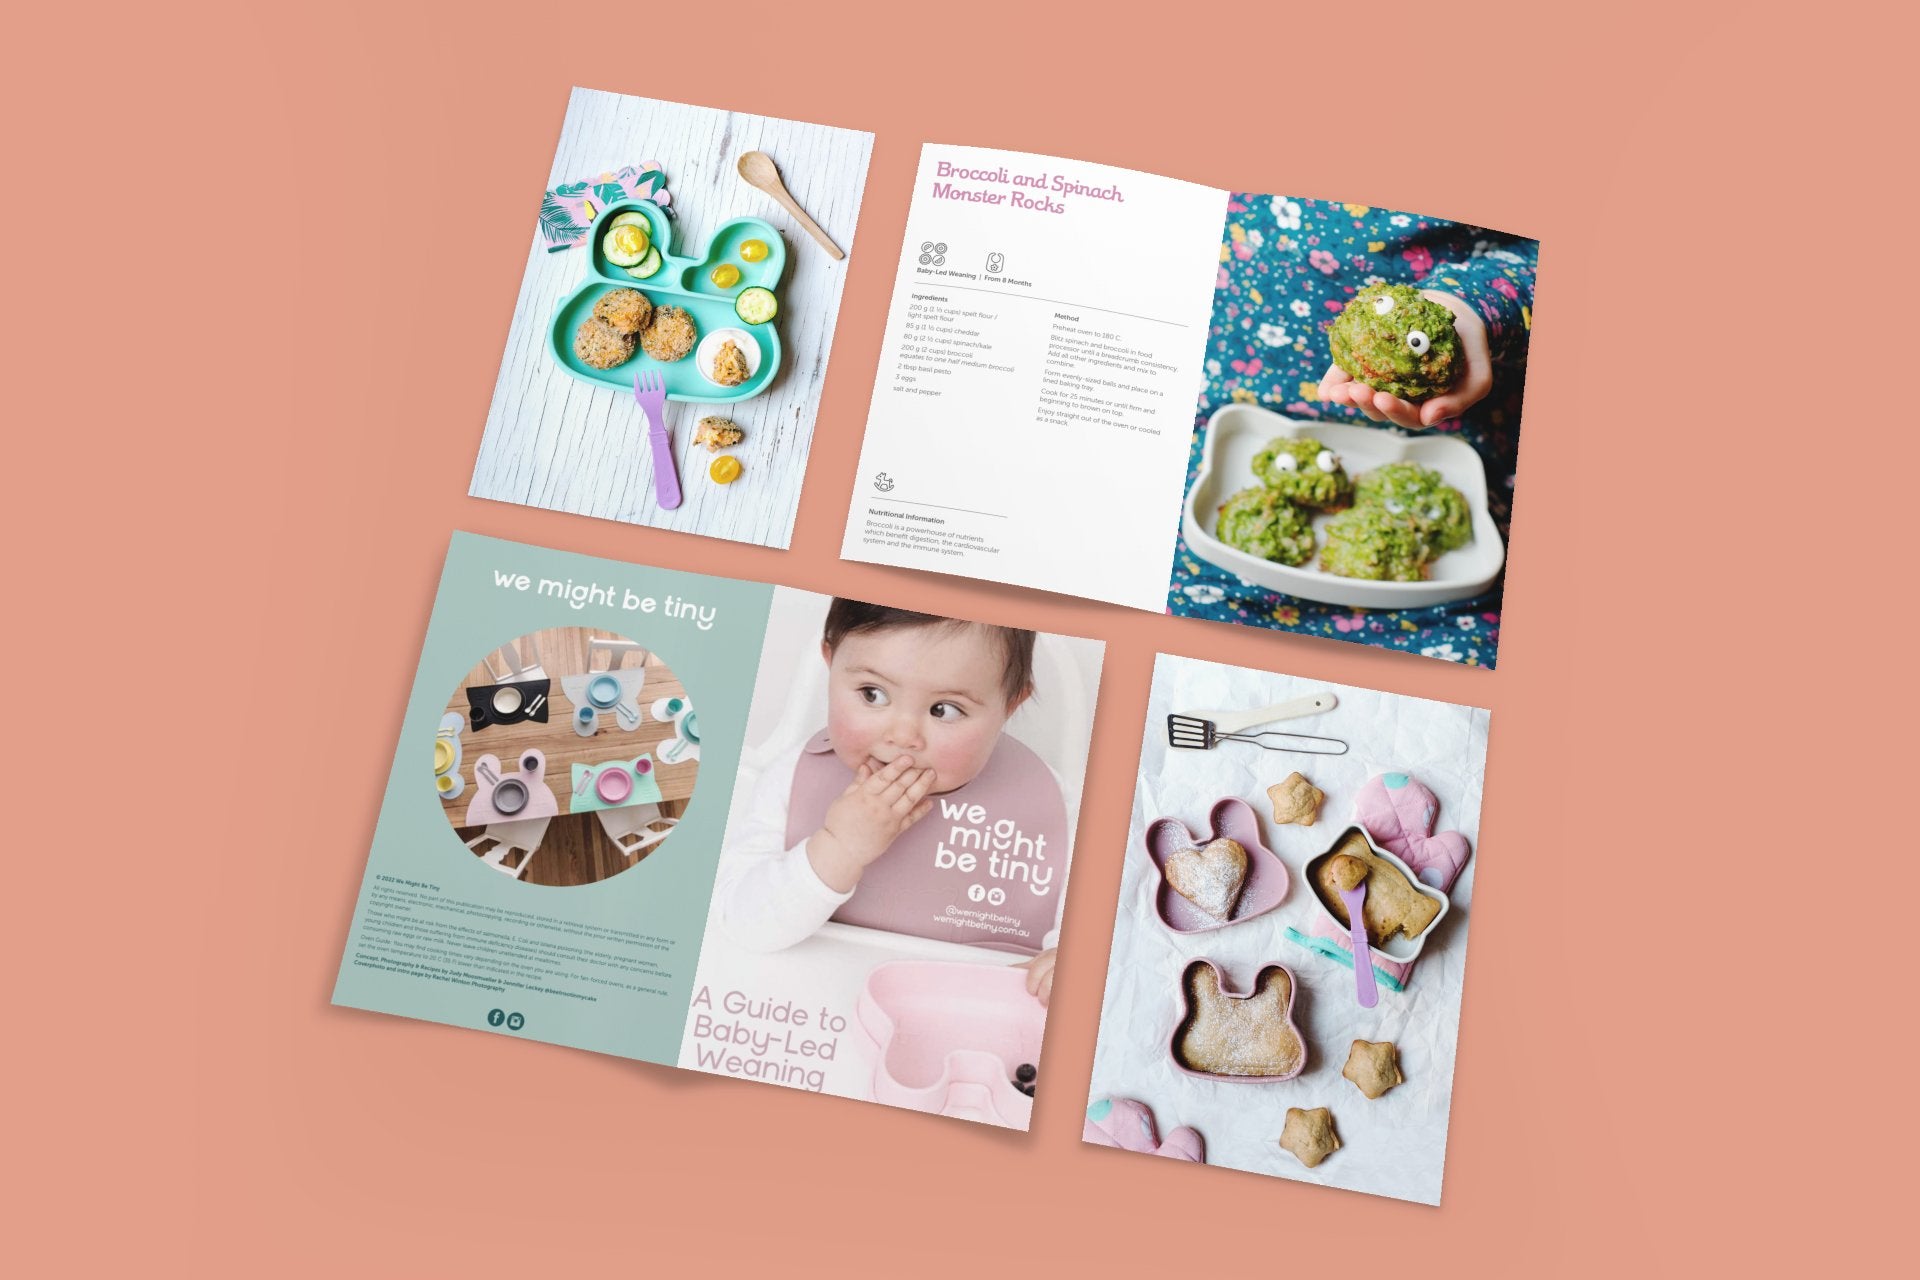 Baby Led Weaning Guide Inside Pages